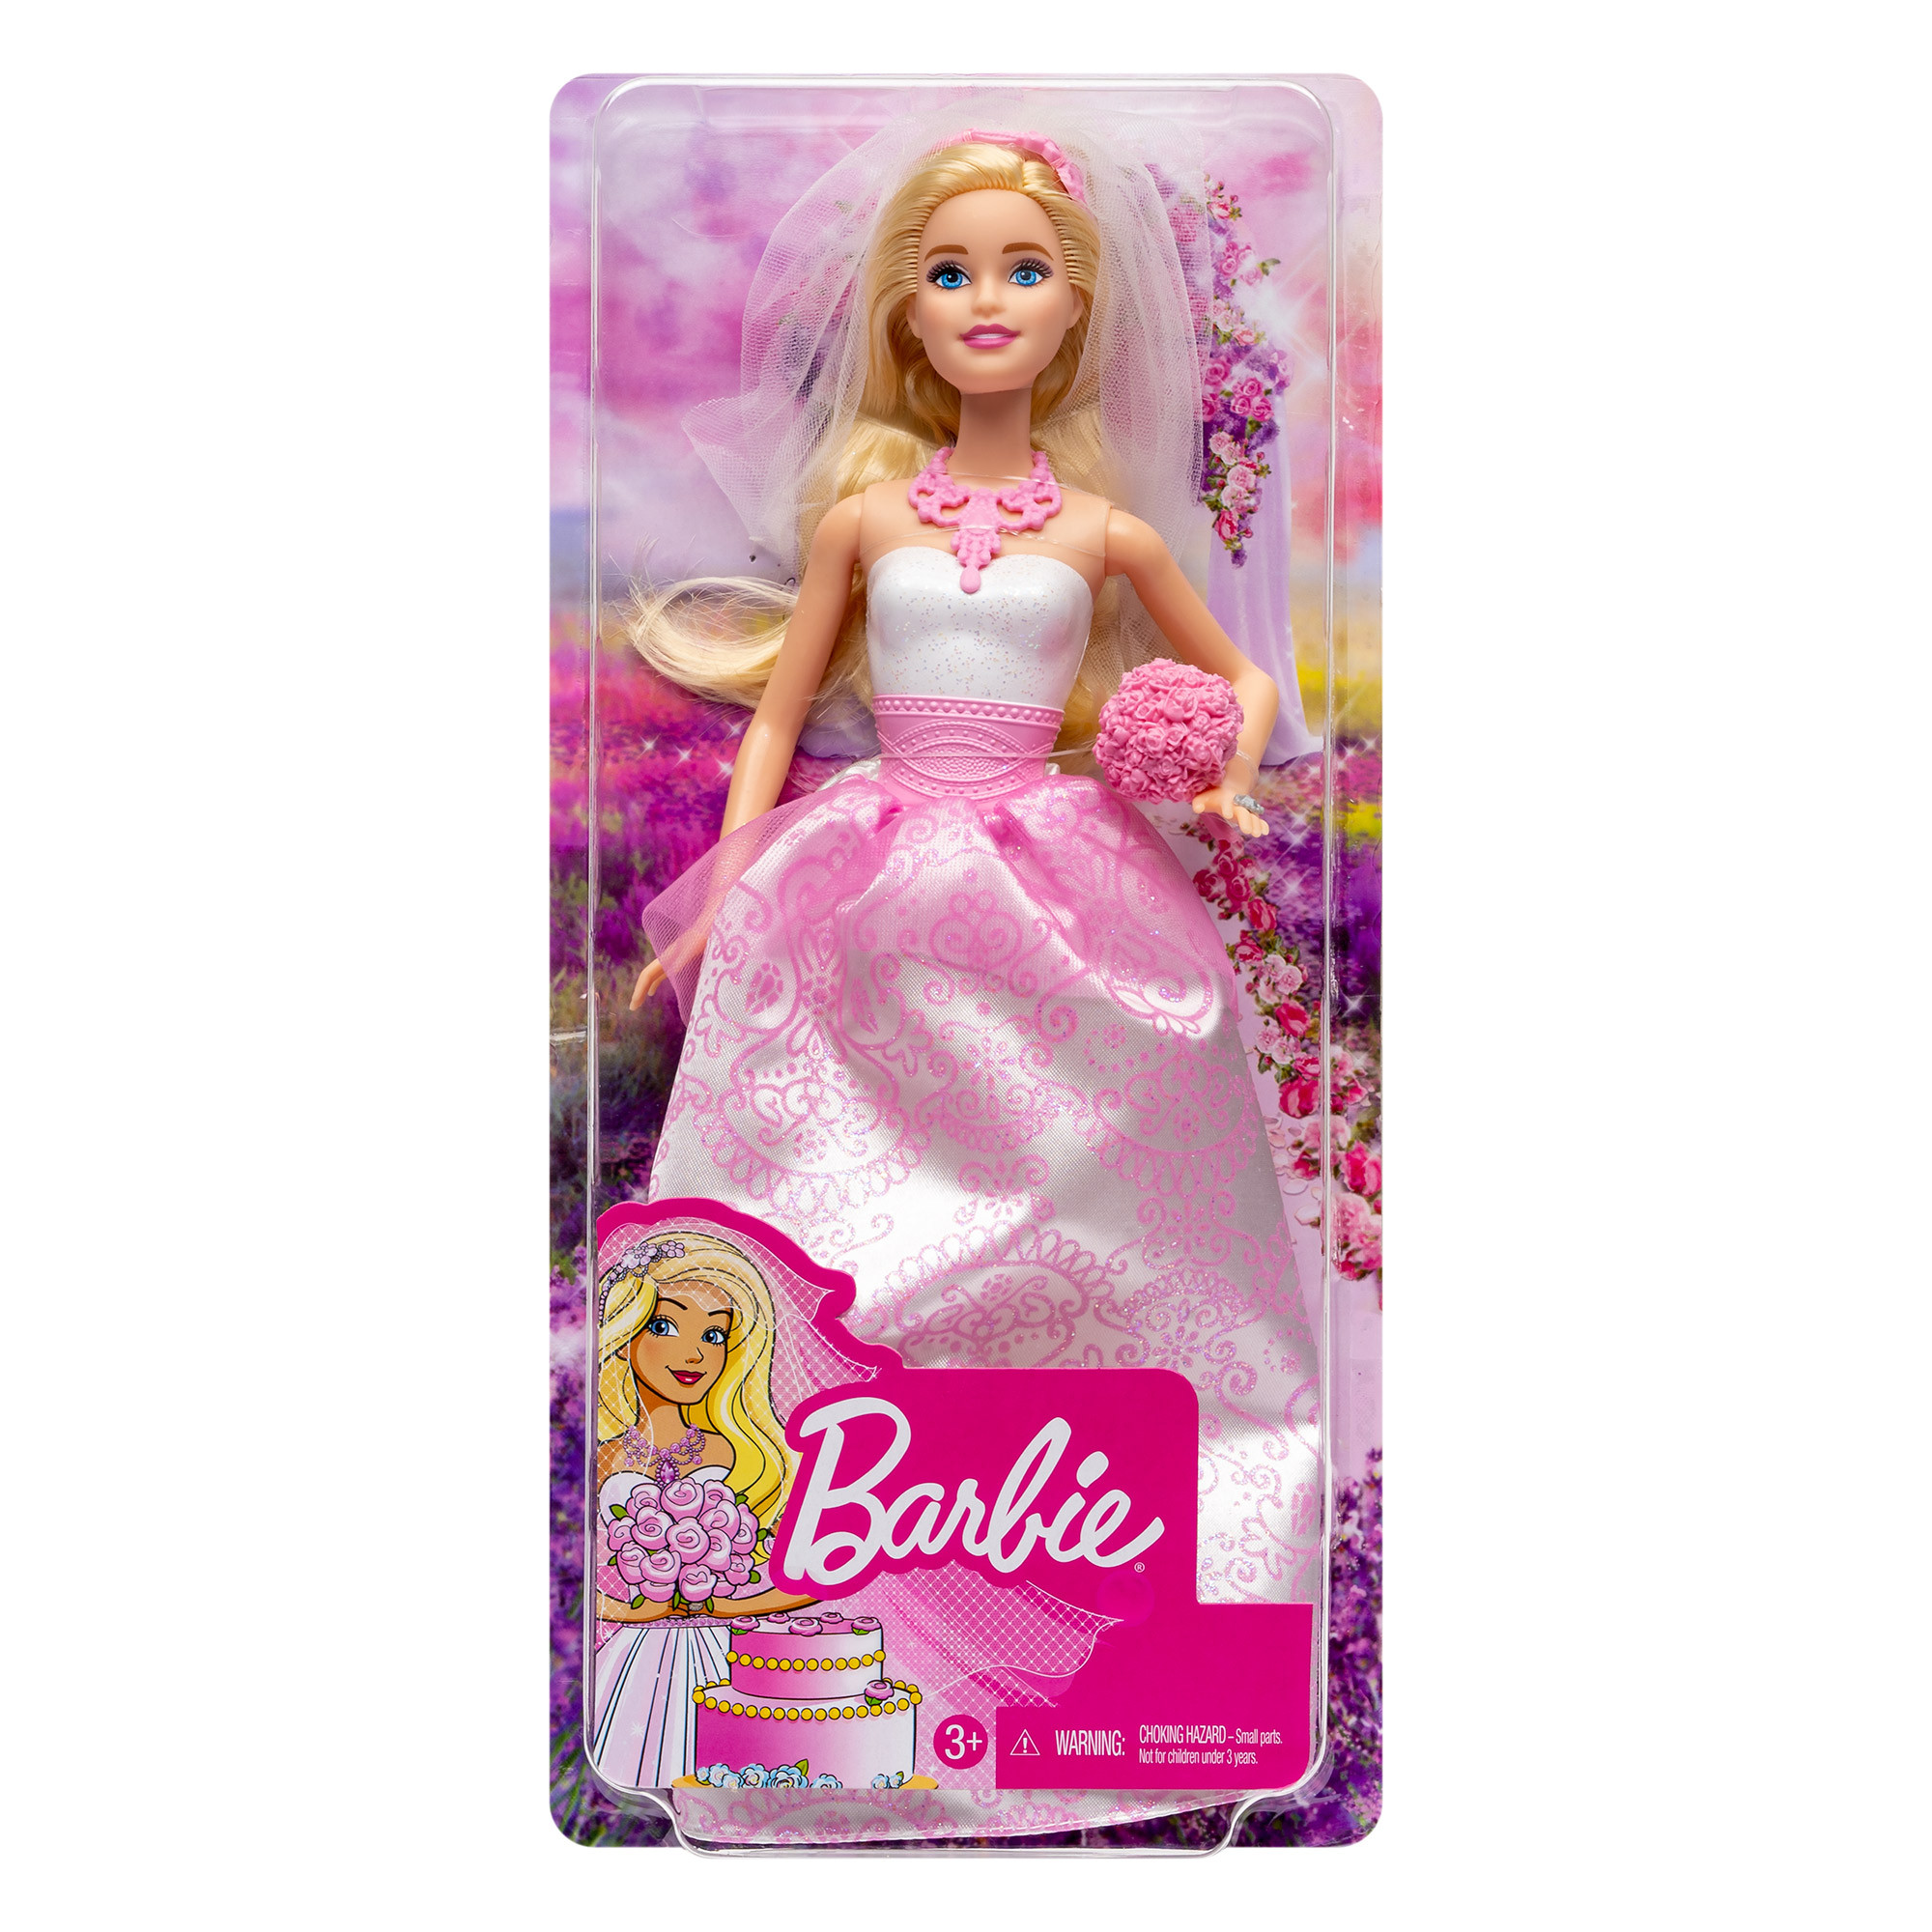 Barbie® Bride Doll - Greenpoint Toys